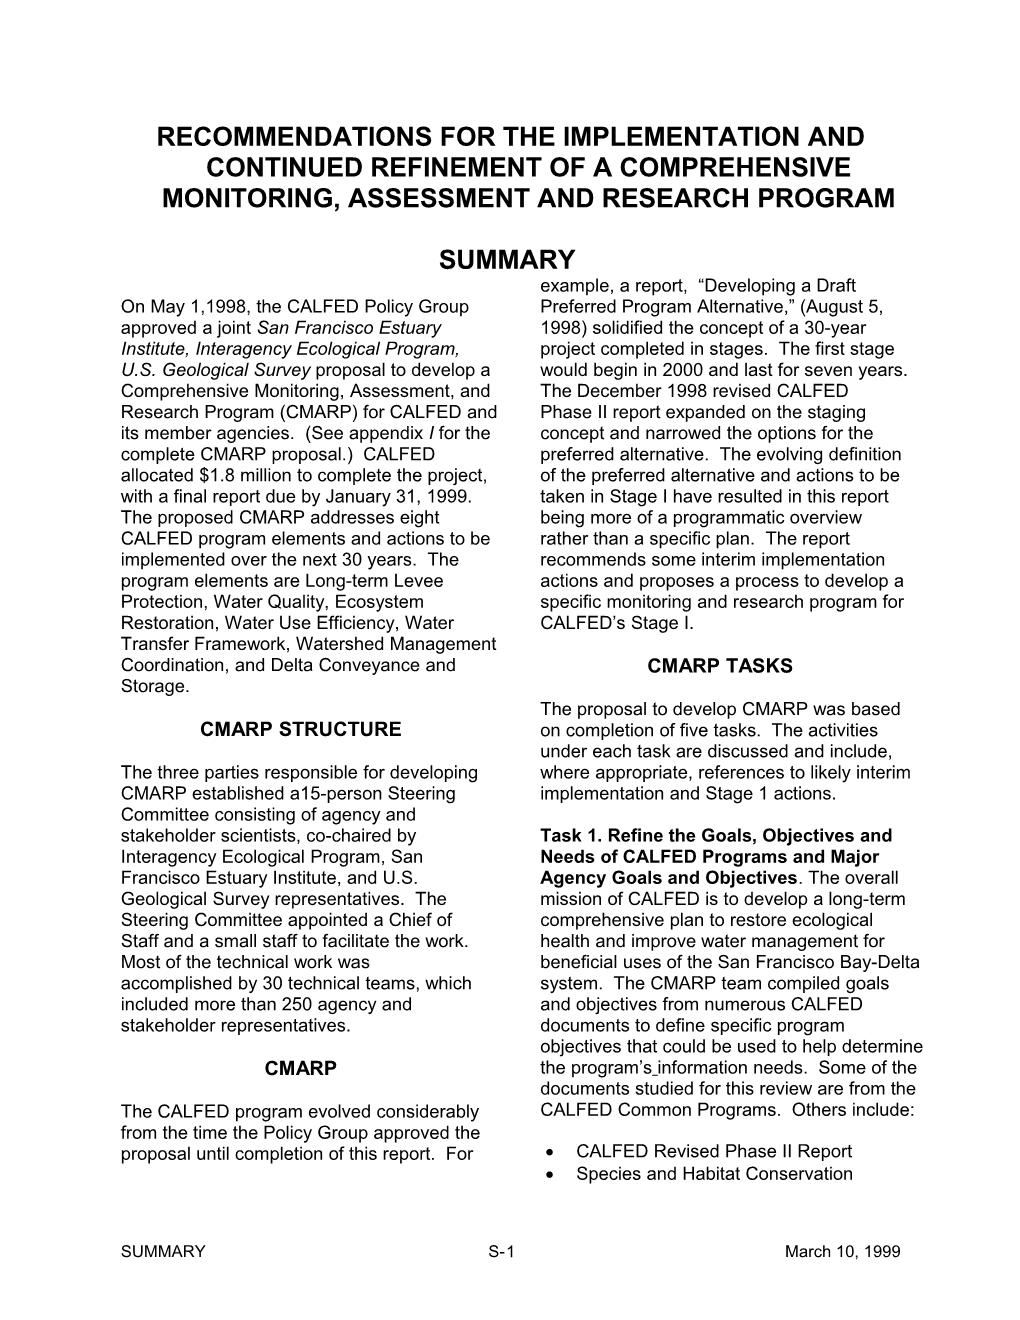 Recommendations for the Implementation and Continued Refinement of a Comprehensive Monitoring